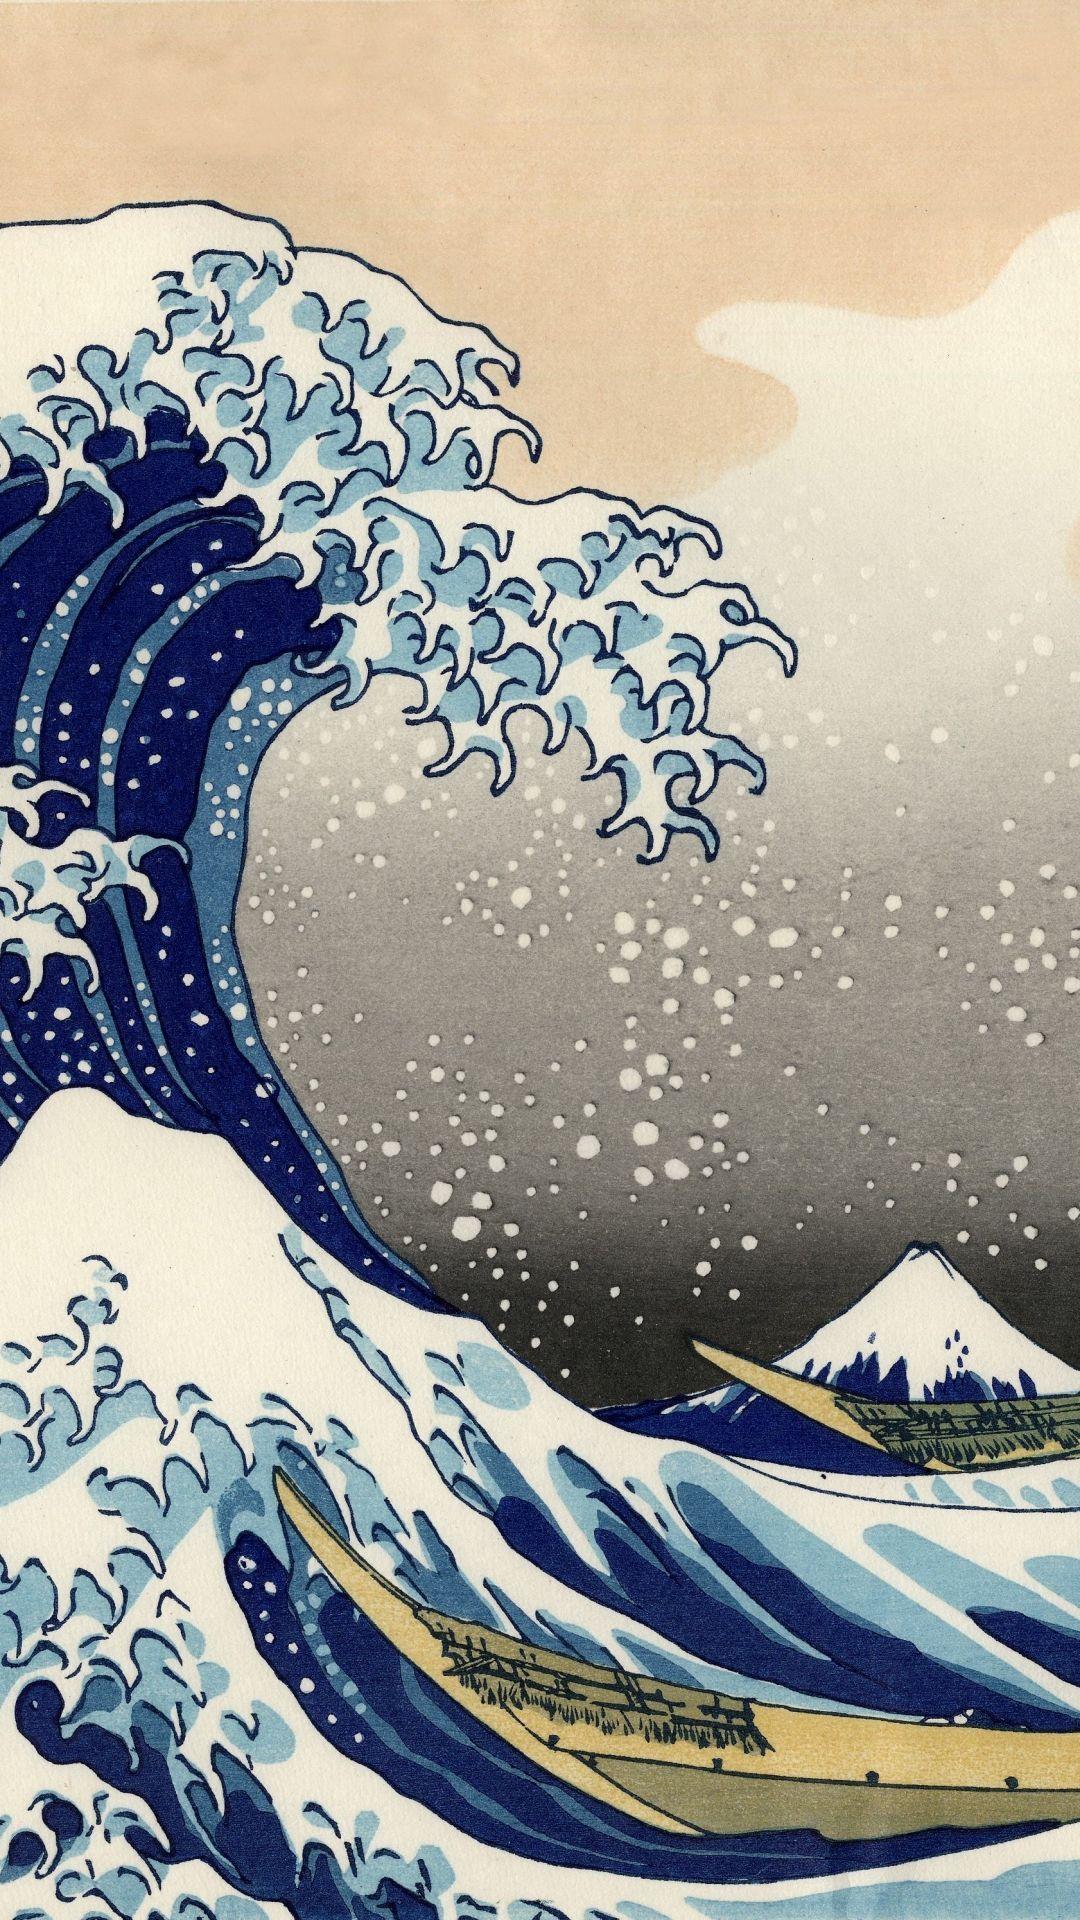 Artistic The Great Wave off Kanagawa Wave Japanese Mobile